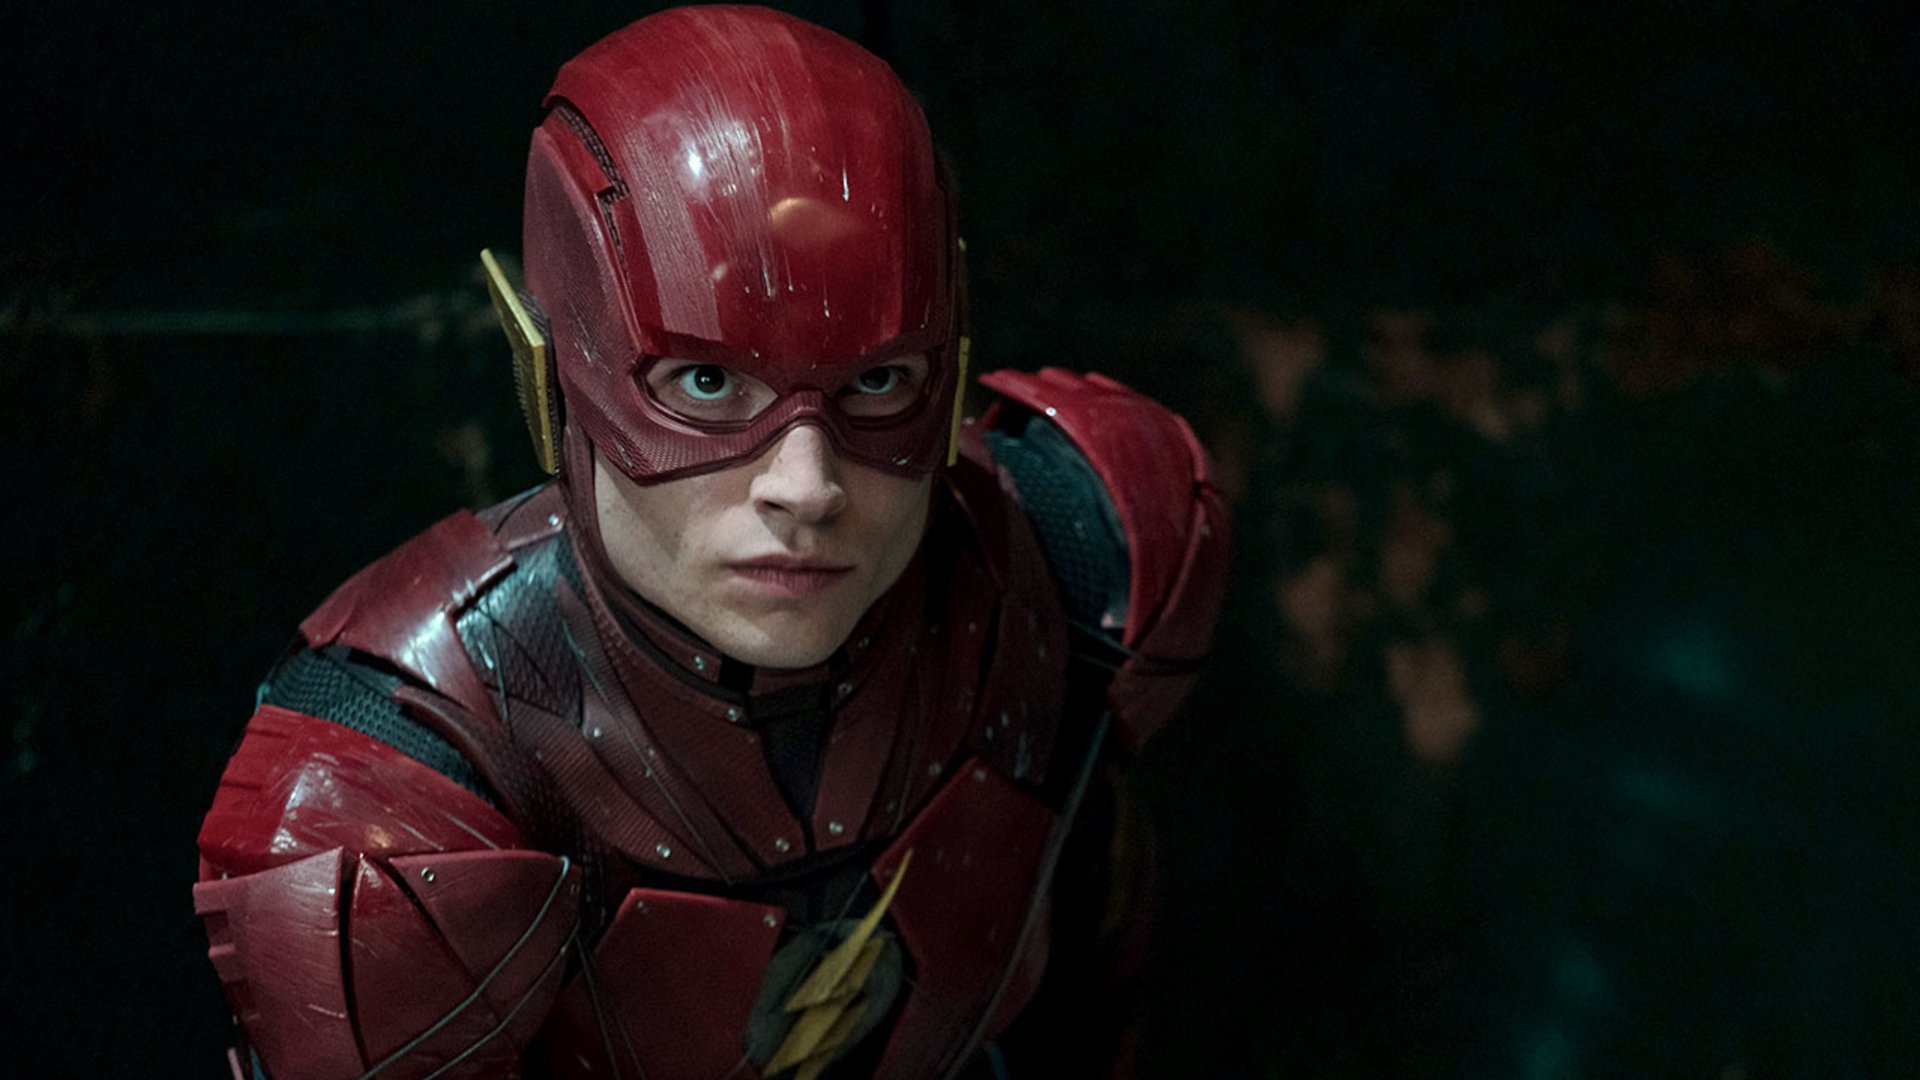 The Flash actor may not have a DC future at Warner Bros.